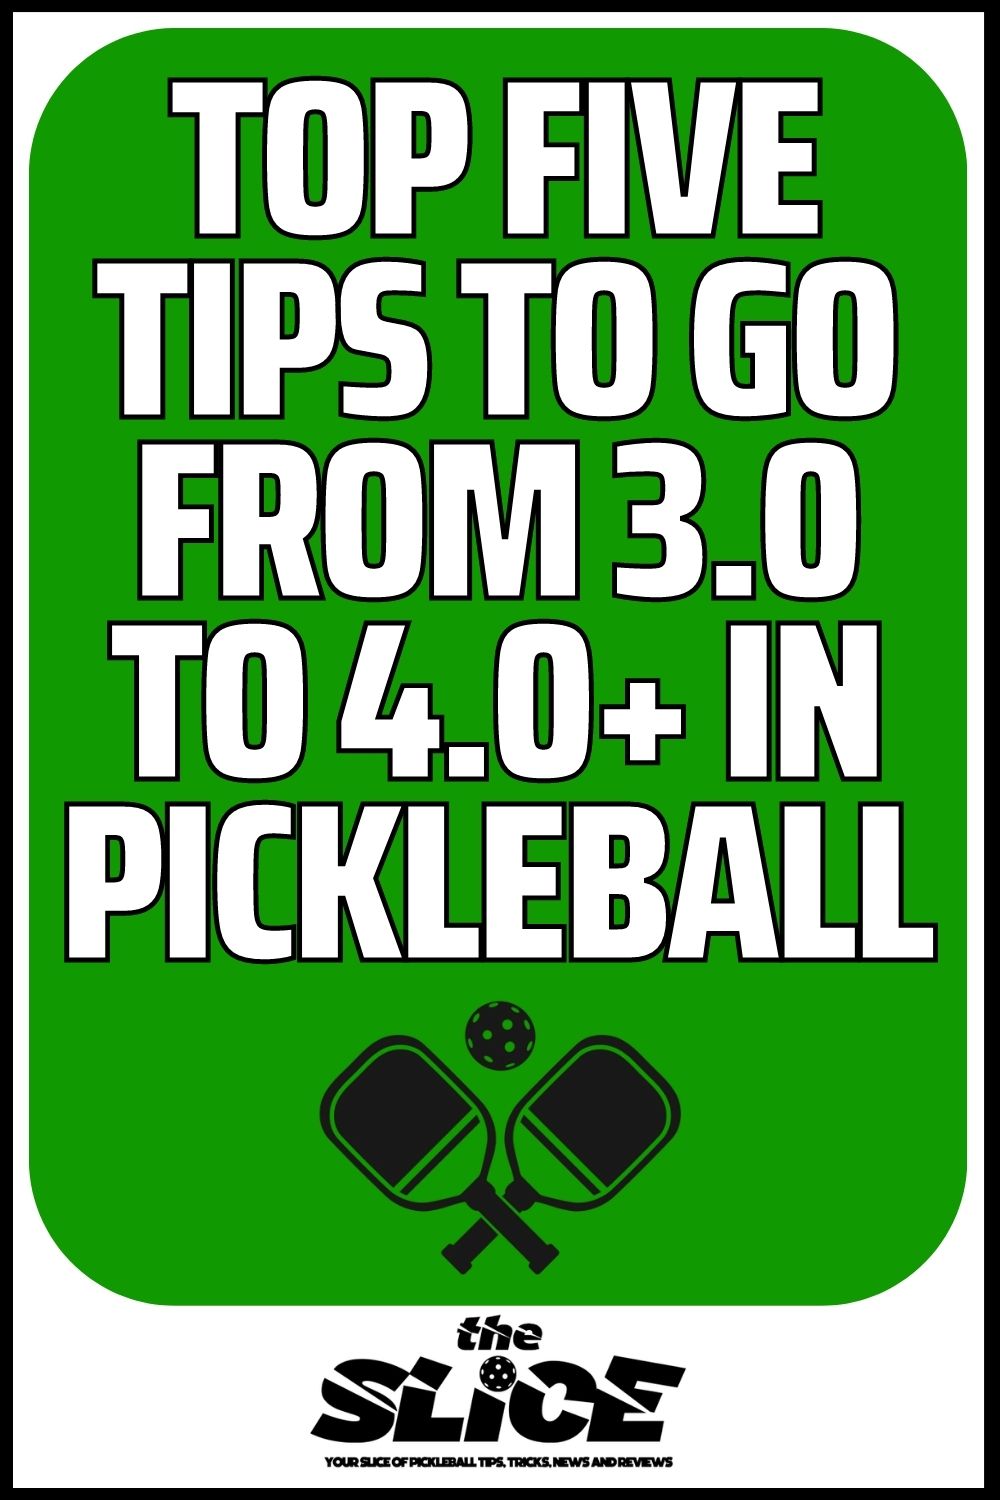 Top Five Tips To Go From 3.0 to 4.0+ In Pickleball (1)